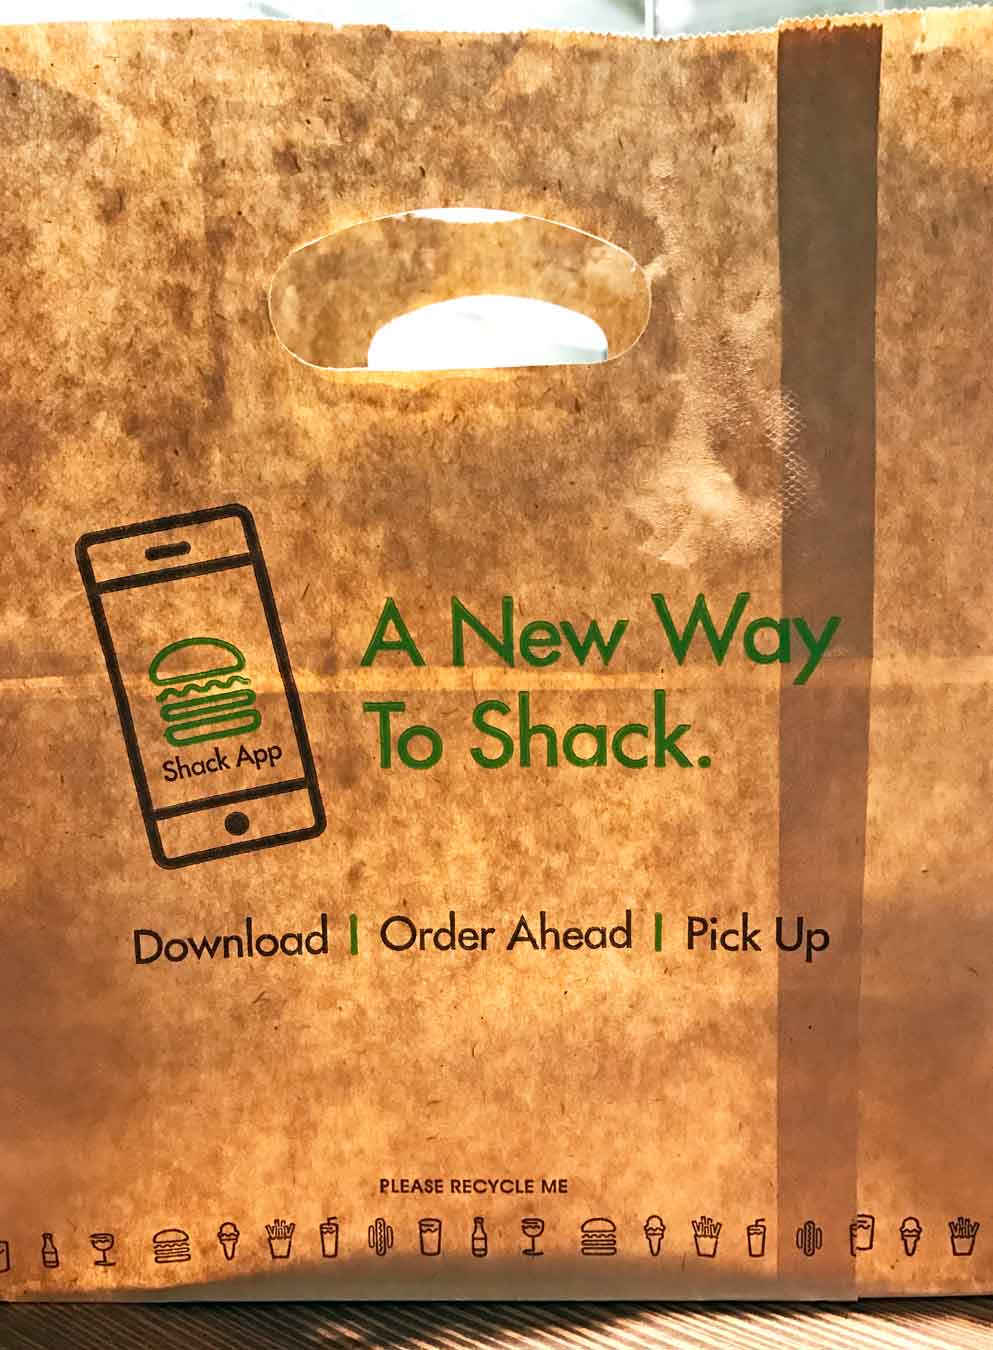 Shake Shack App Lets You Order Food On Your Phone & Receive A Text When It's Ready to Pick Up. /// Shake Shack Detroit Might Be Your New Favorite Burger Spot /// - From sandwiches, fries, and shakes to local flavors and an awesome location, learn why long-time fans and newbies alike are sure to love the new Shake Shack in Downtown Detroit, Michigan. /// via Wading in Big Shoes